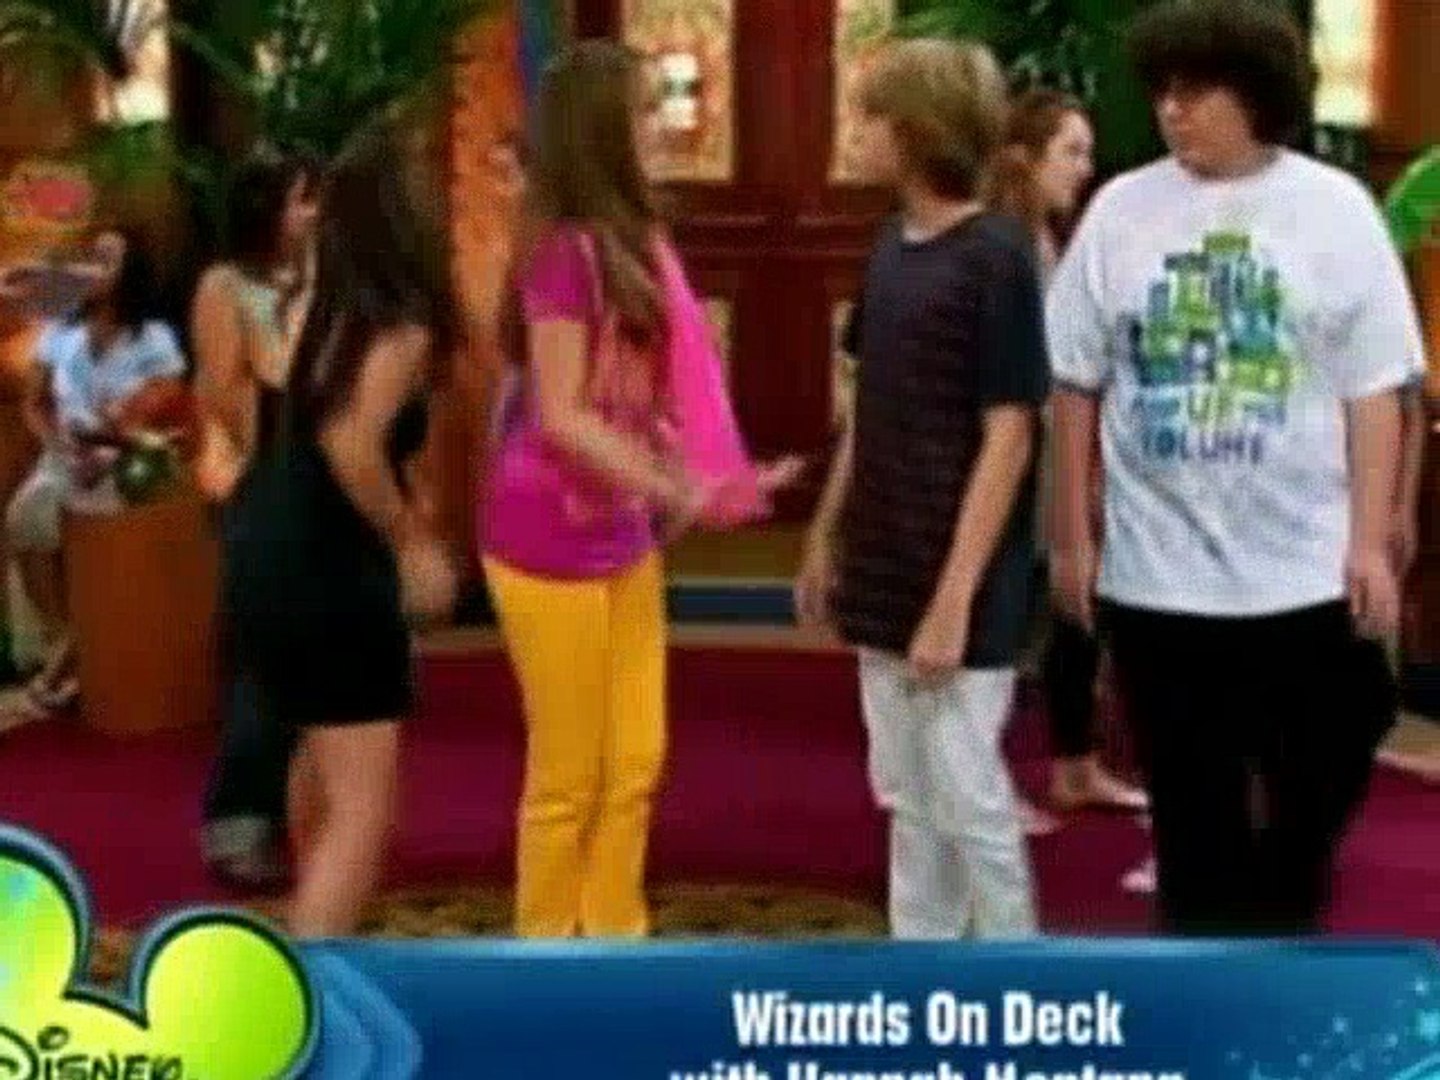 The Suite Life on Deck S01E21 - Double-Crossed - Part-II - video Dailymotion